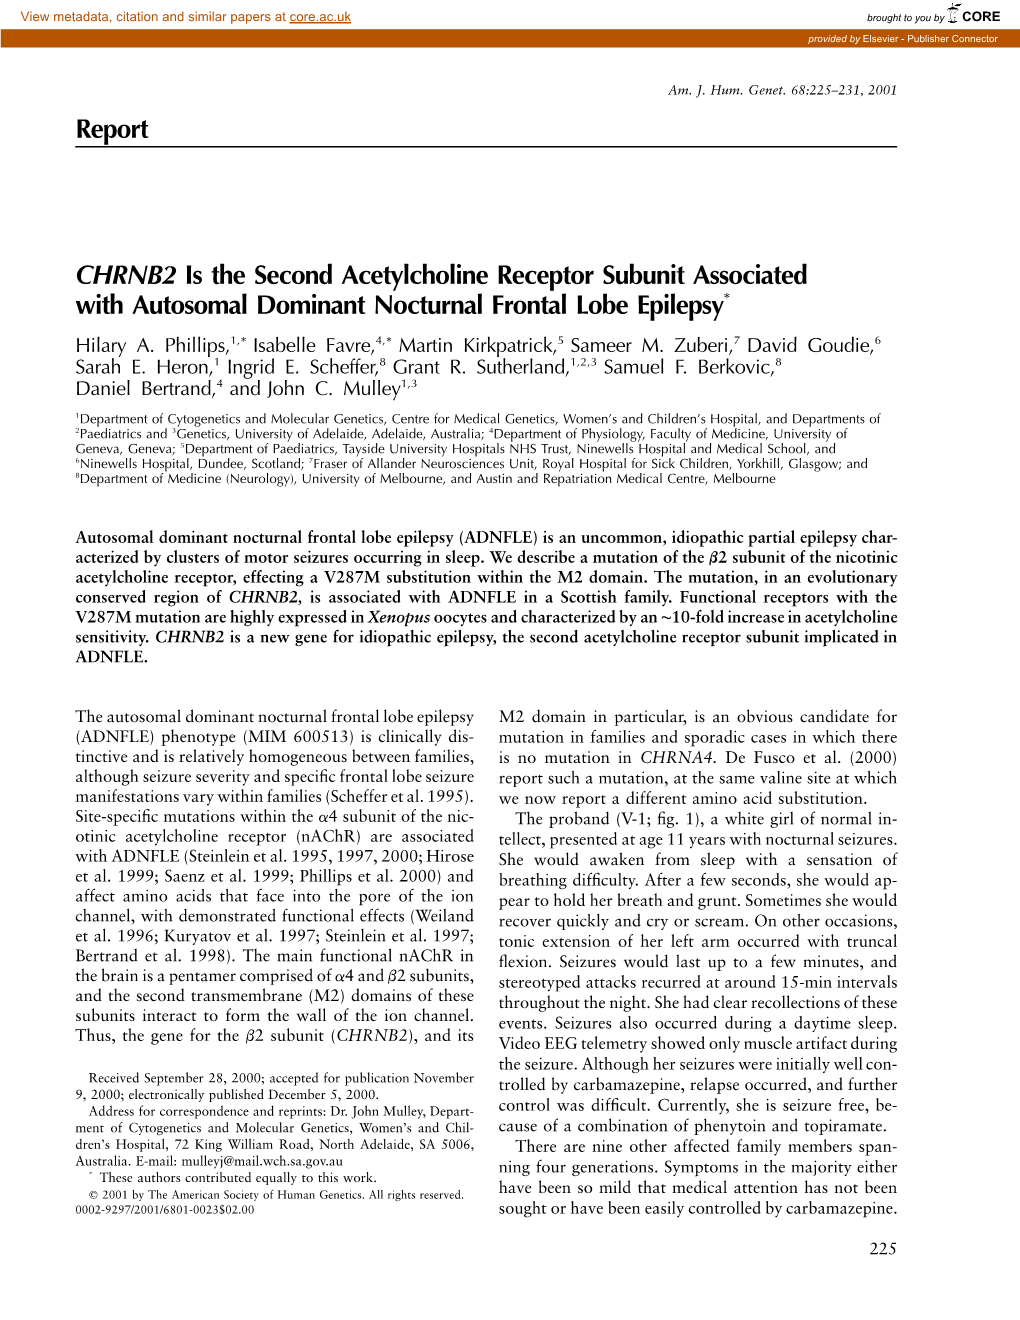 Report CHRNB2 Is the Second Acetylcholine Receptor Subunit